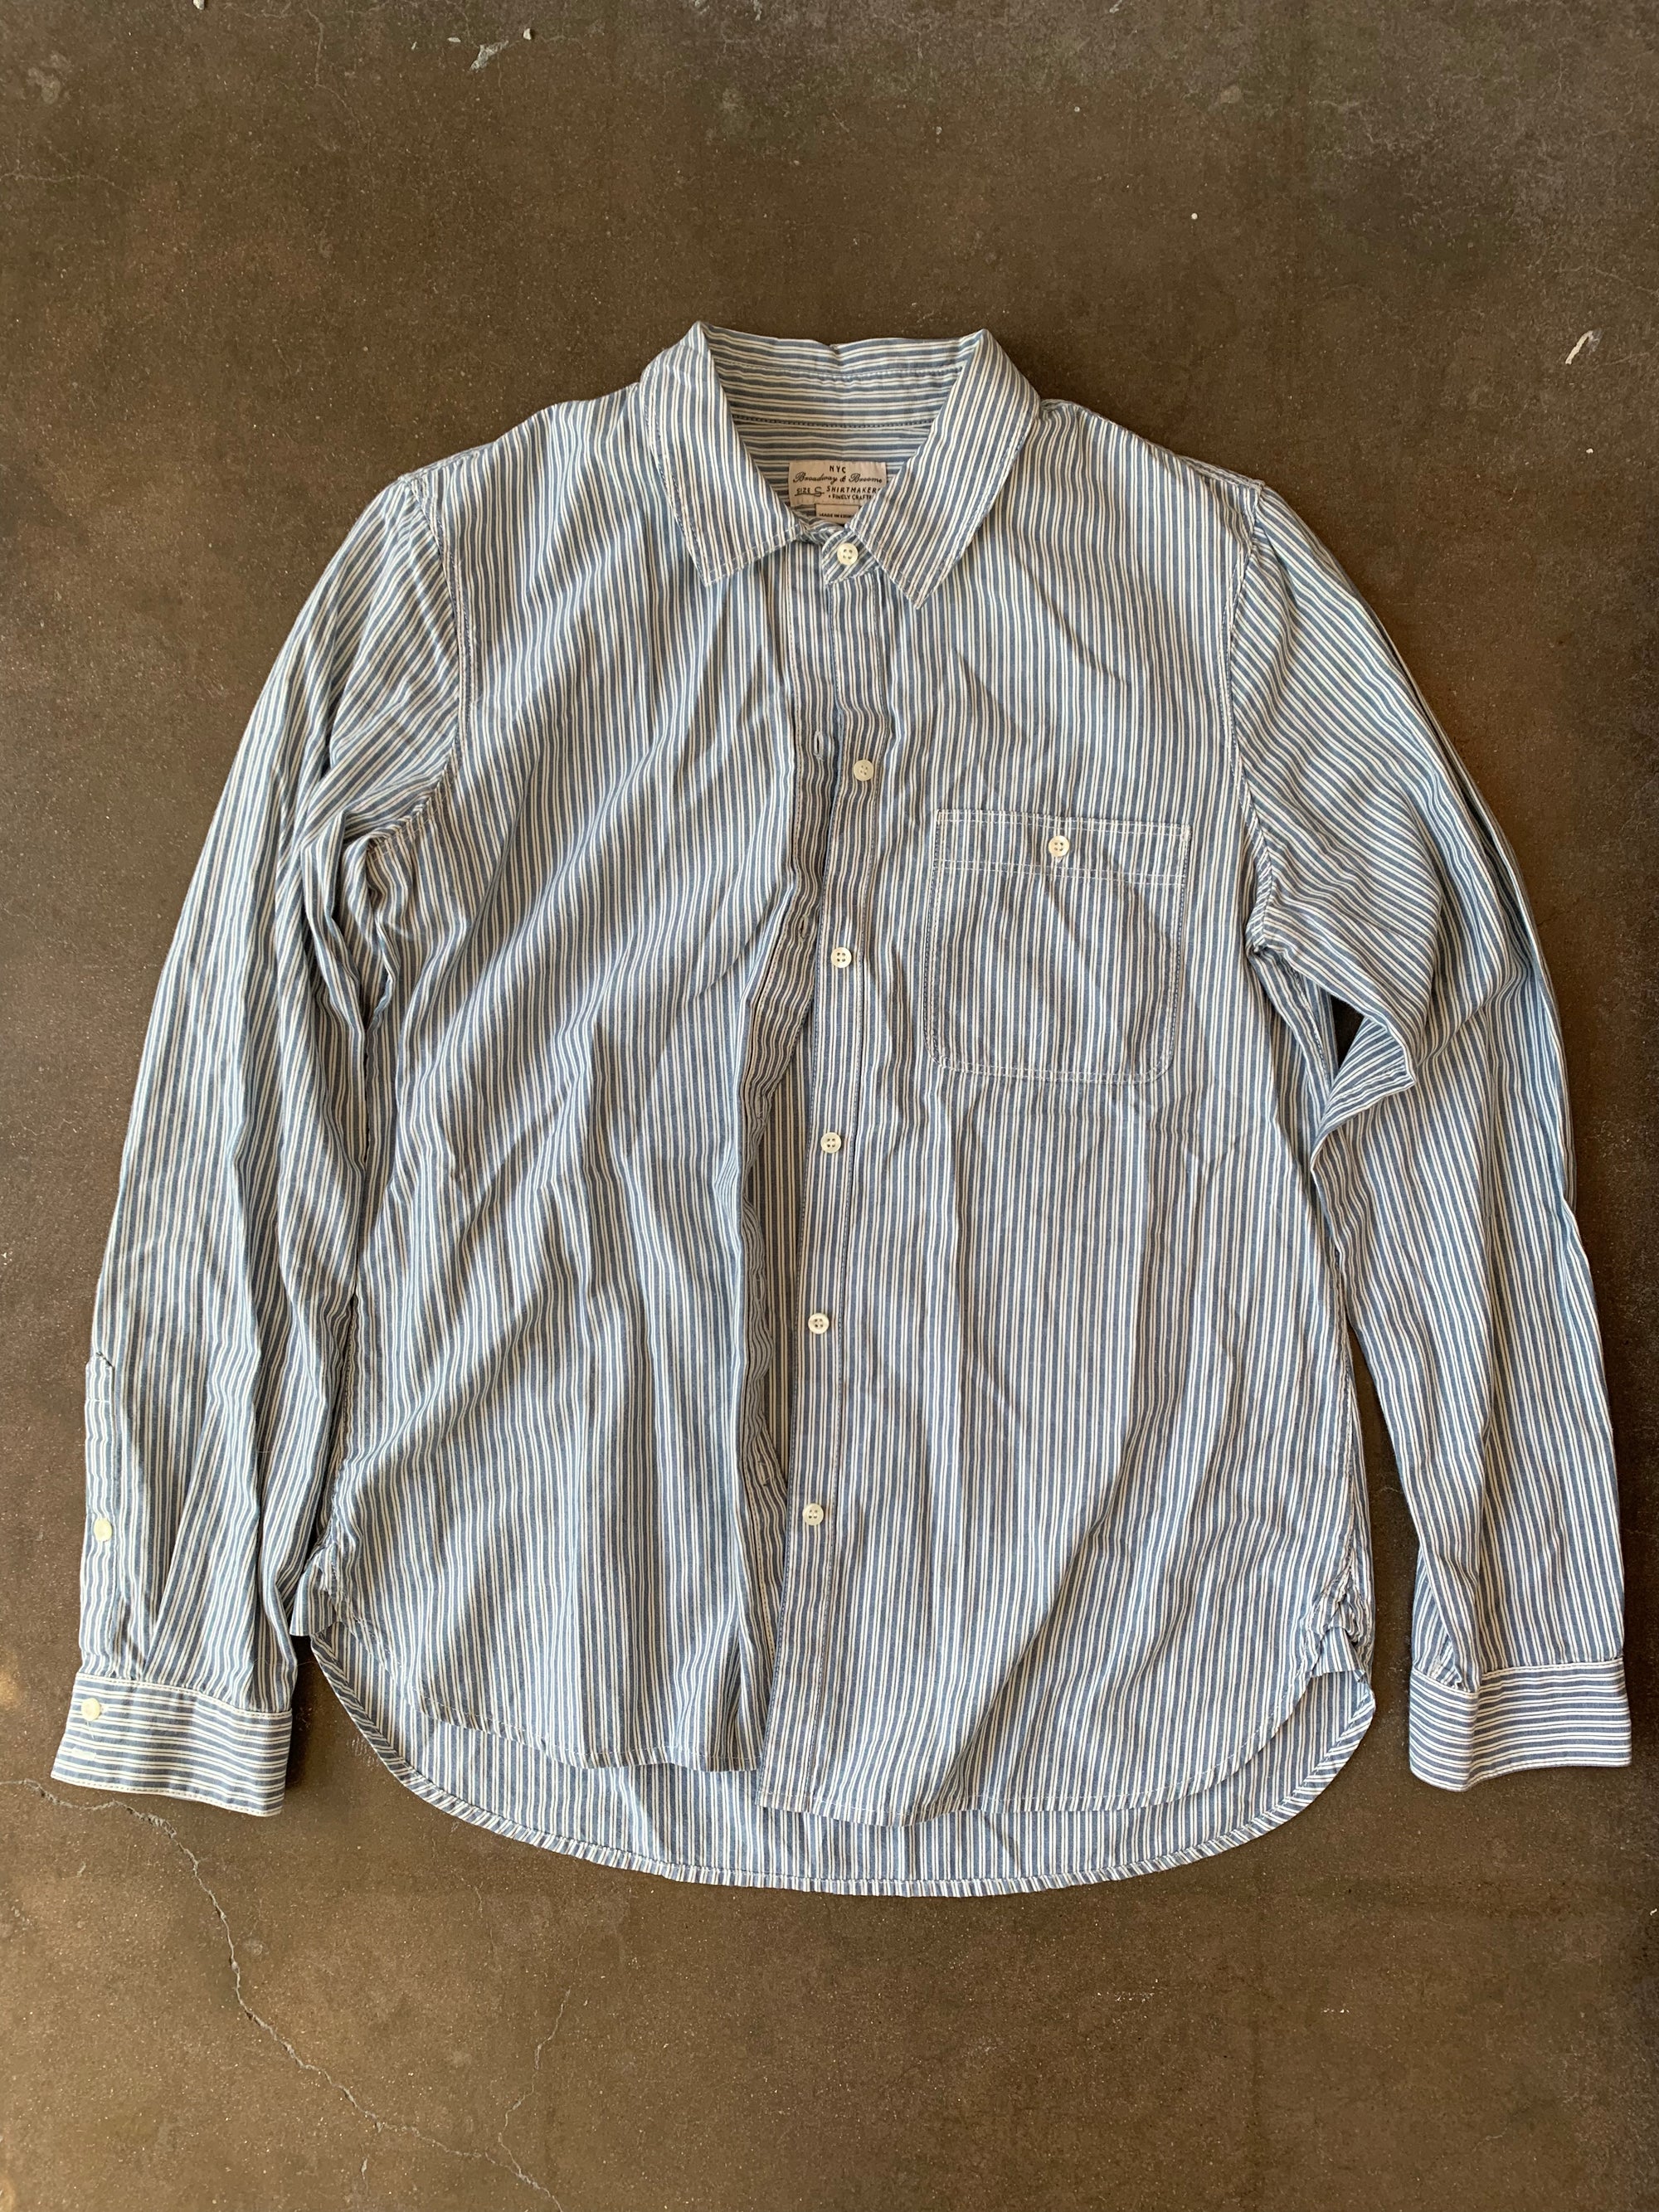 Vintage NYC Broadway & Broome Striped Button Down